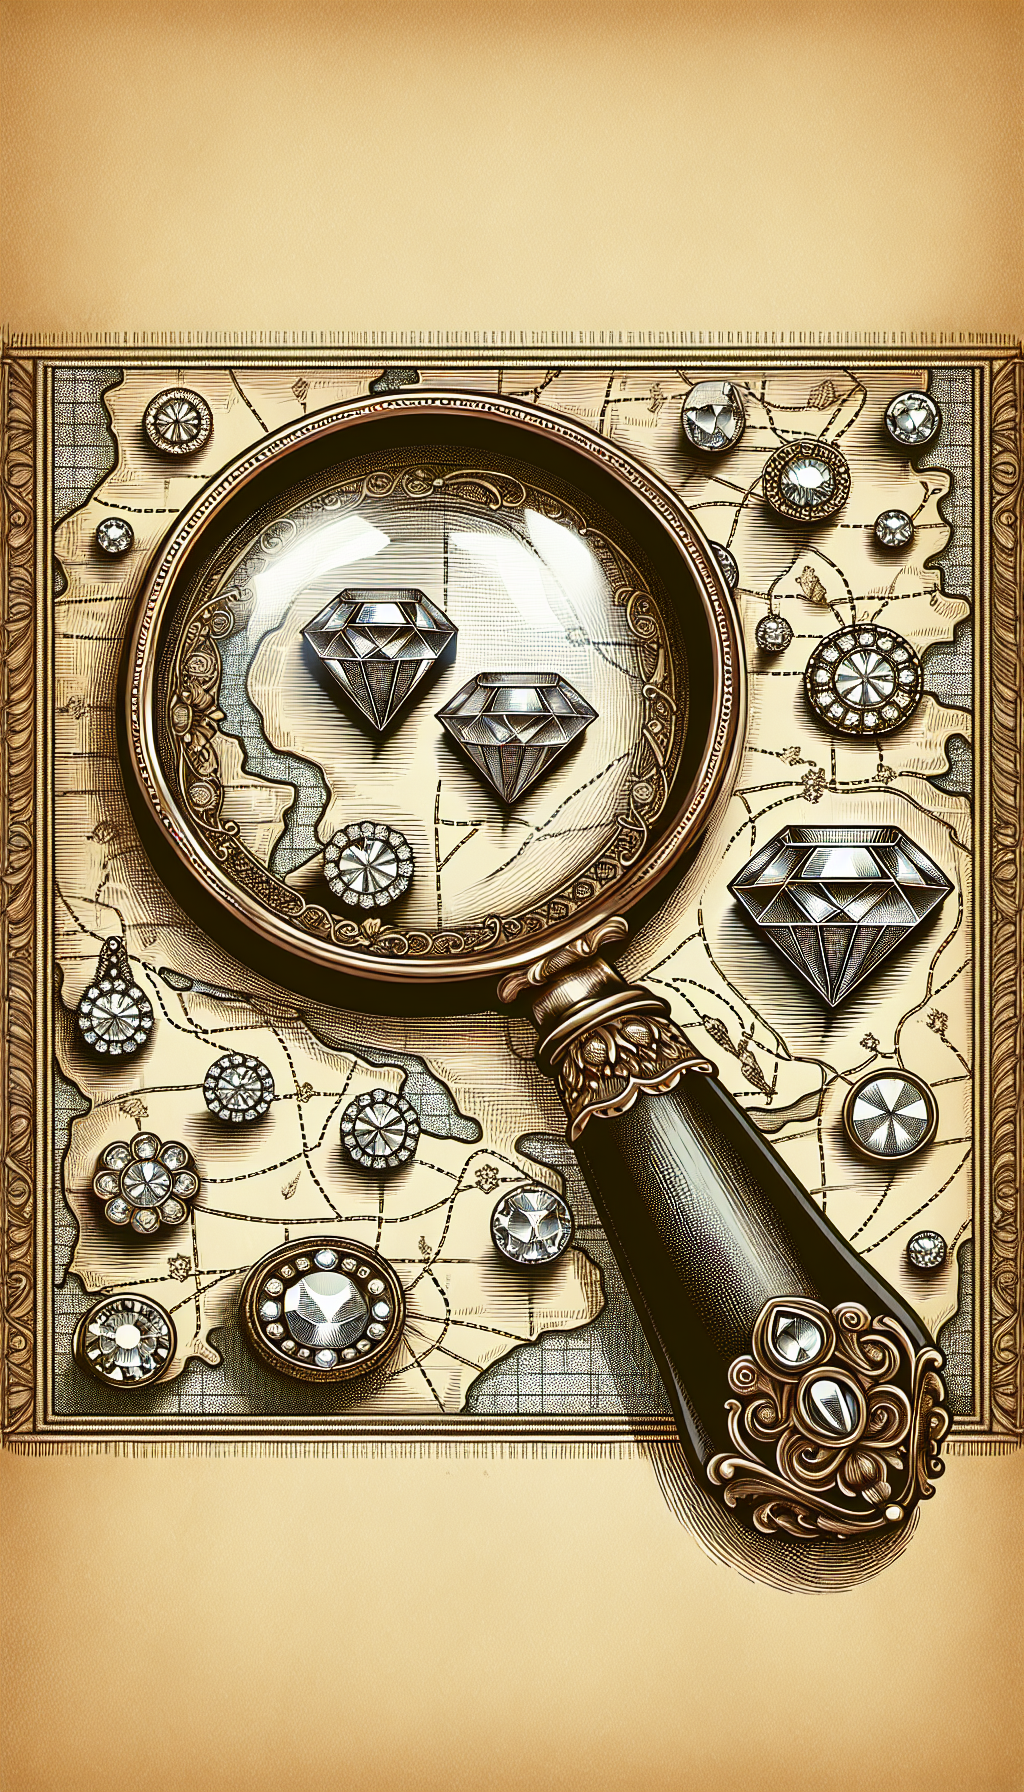 An illustration of a magnifying glass adorned with intricate vintage jewelry patterns, peering over a stylishly old-fashioned map dotted with sparkling jewels to mark the locations of expert appraisers nearby. The magnifying handle is shaped like an antique brooch, symbolizing the blend of the search for expertise and the charm of antique jewelry appraisals.